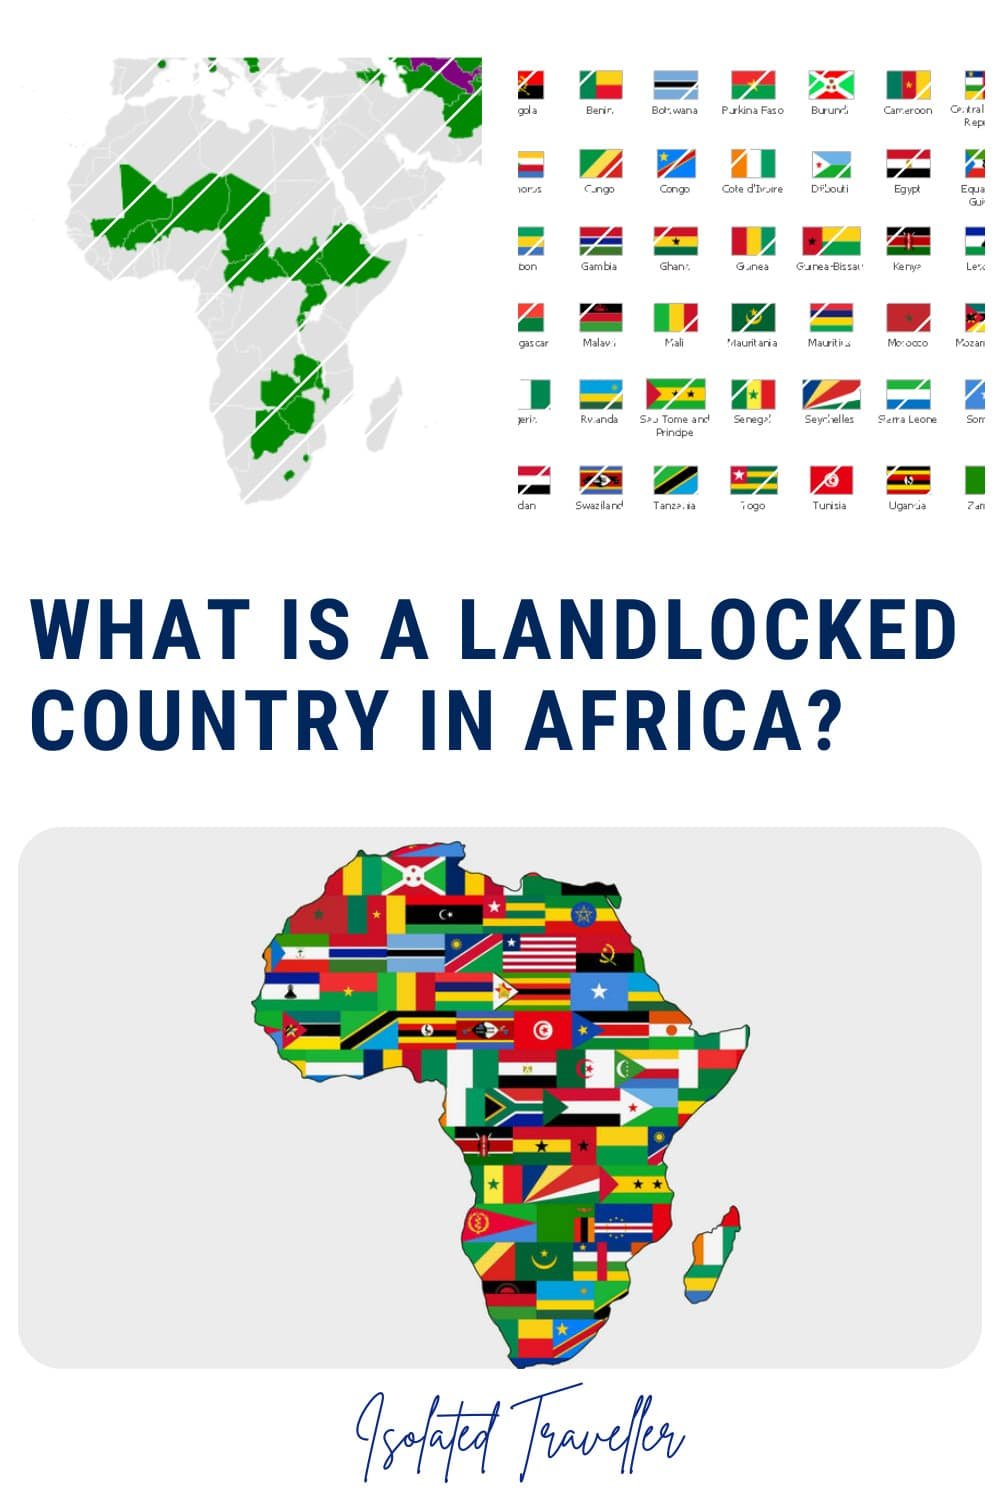 What is a landlocked country in Africa?